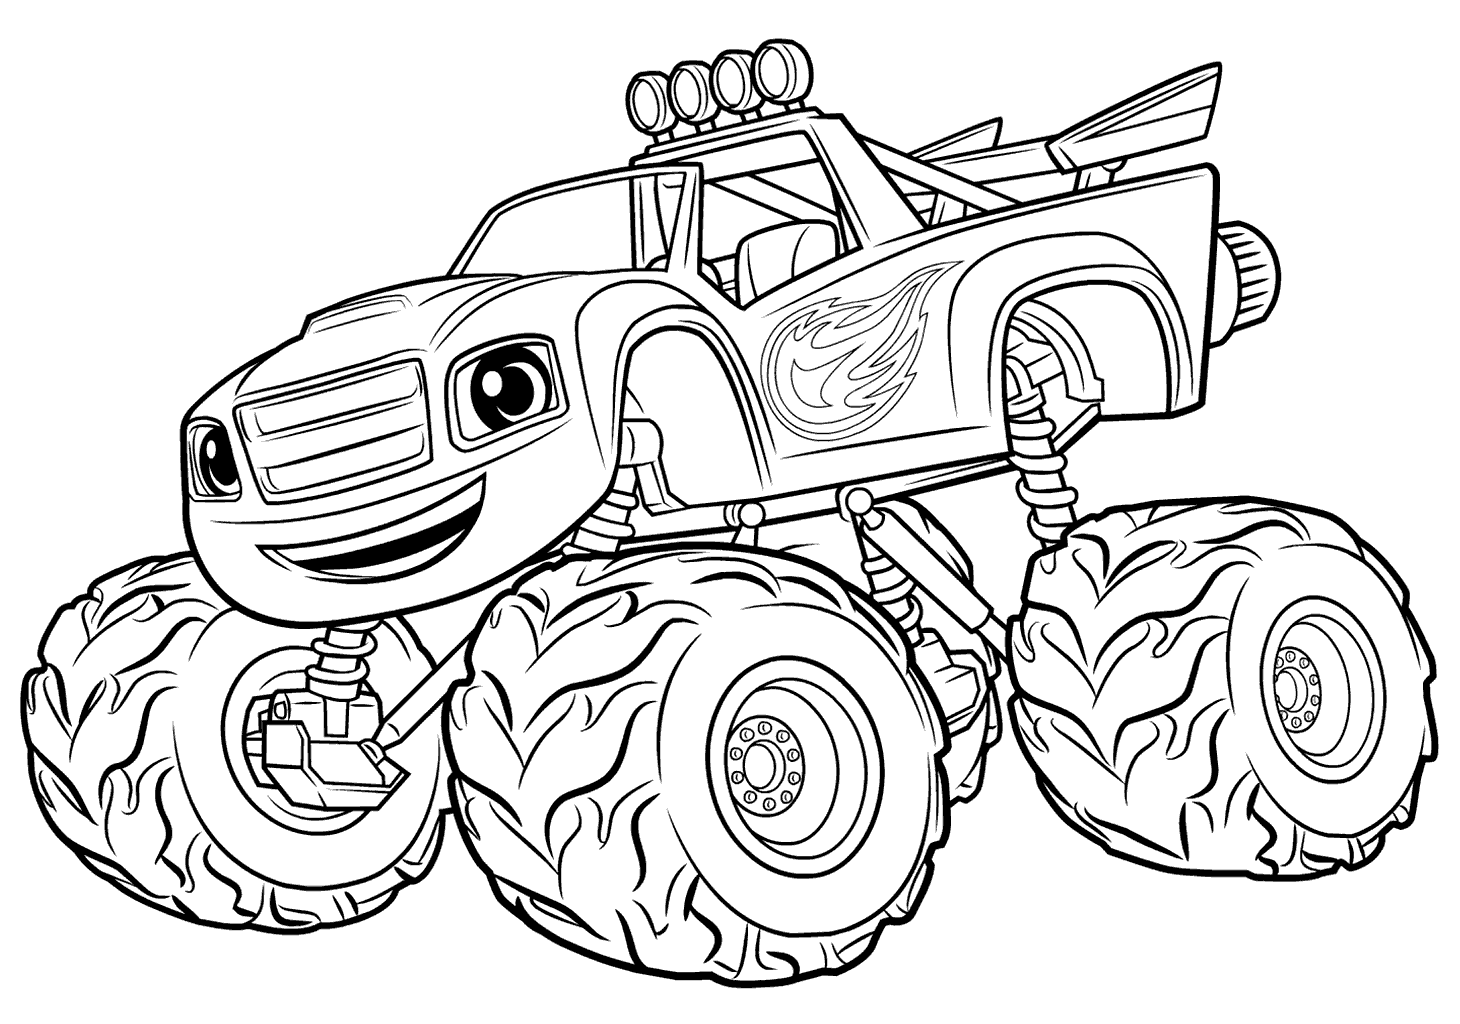 Blaze and the Monster Machines Coloring Pages - Best Coloring Pages For